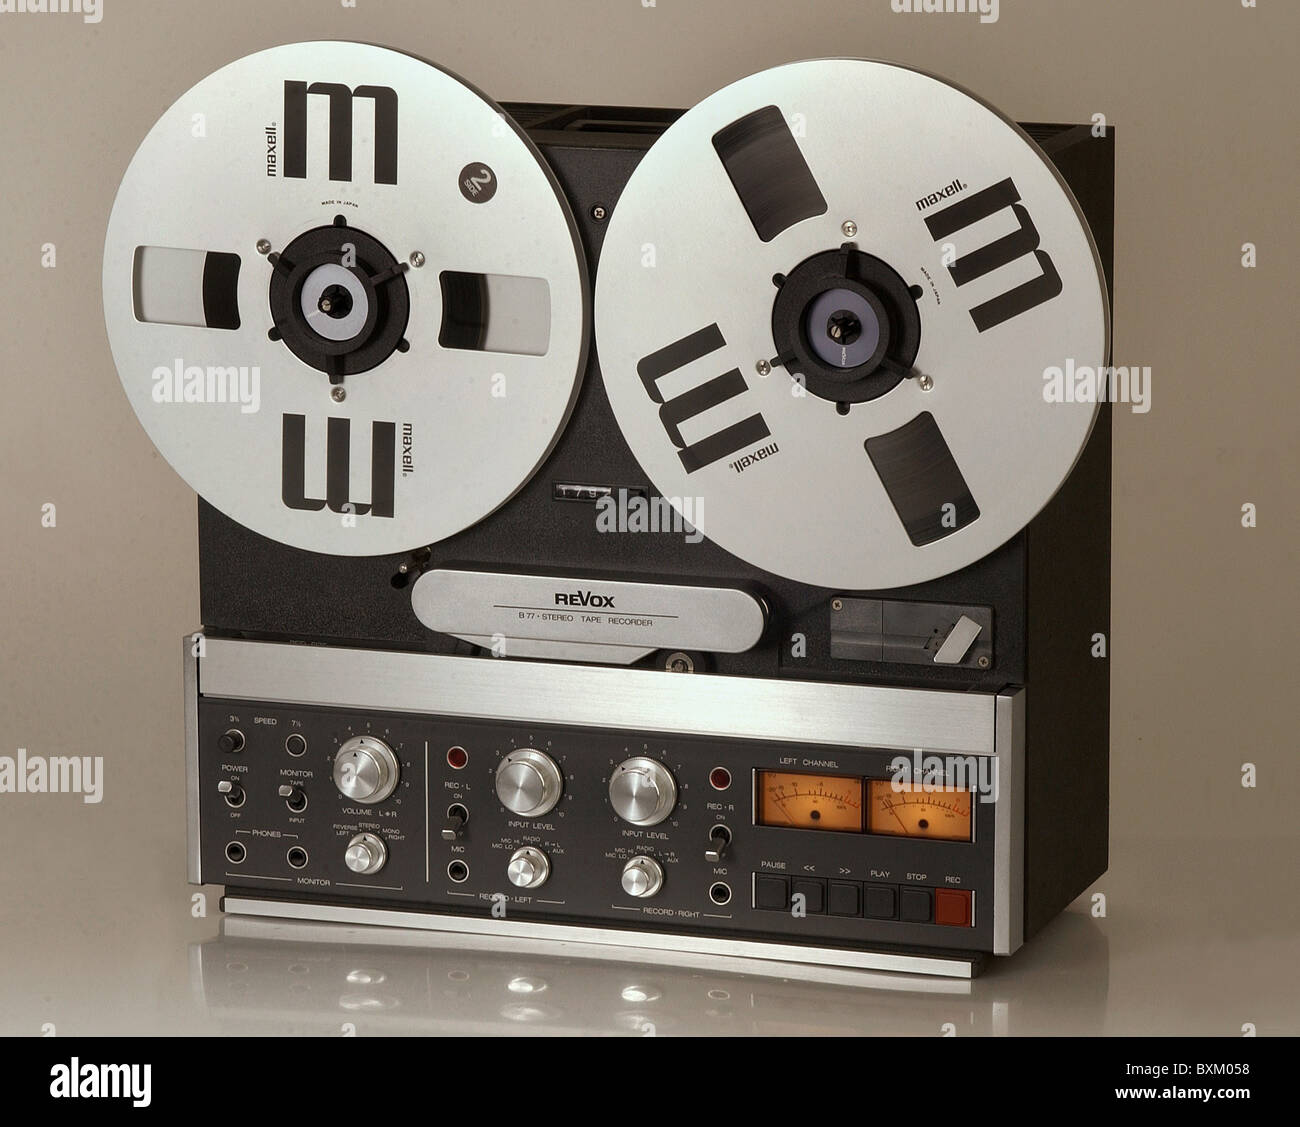 technics, tape recorder, Revox B77, made by Willi Studer AG, Regensdorf-Zurich, Switzerland, 1978, tape recorders, 1970s, 70s, 20th century, historic, historical, technic, electronics, magnetic tapes, Maxell tapes, weight: 17 kilogram, recording device, devices, audio, machine, Additional-Rights-Clearences-Not Available Stock Photo